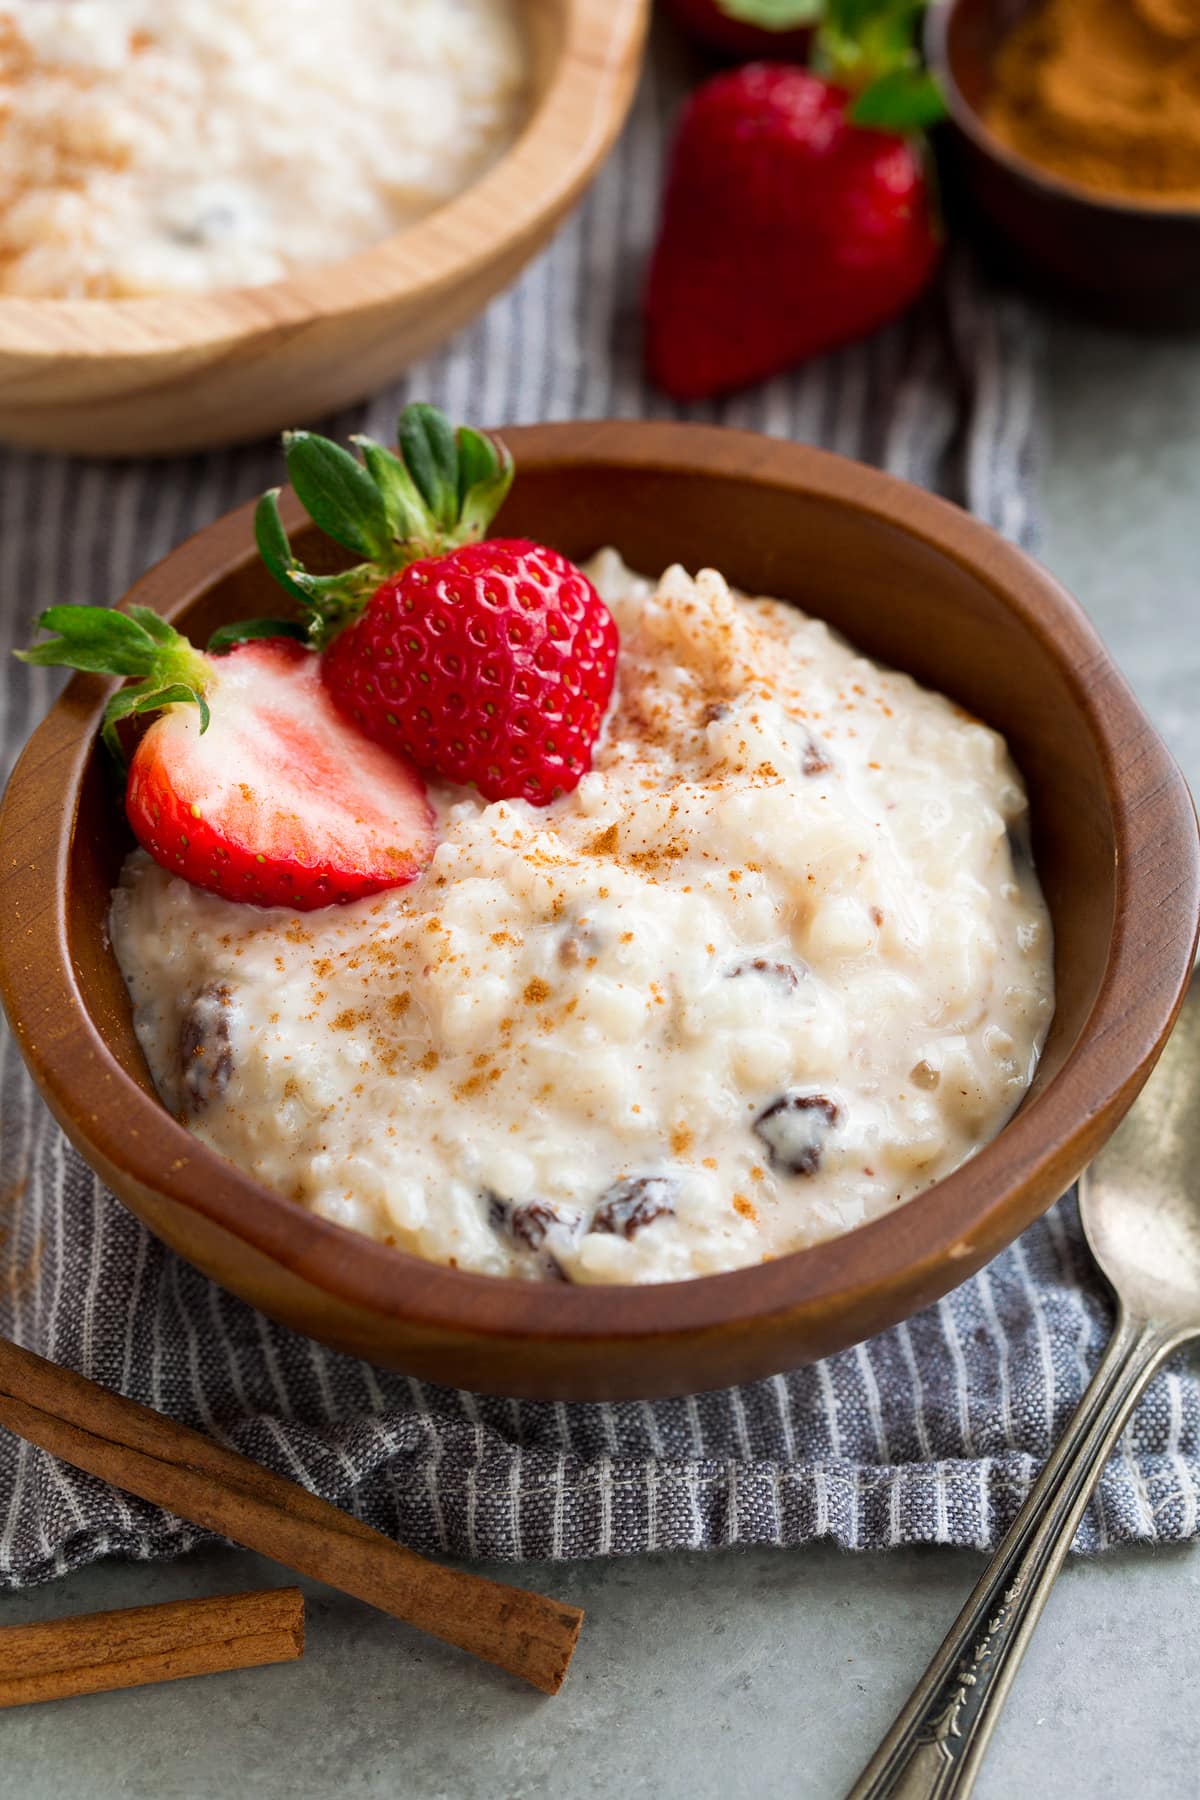 Rice Pudding in a small wooden bowl. It is garnished with cinnamon and strawberries.